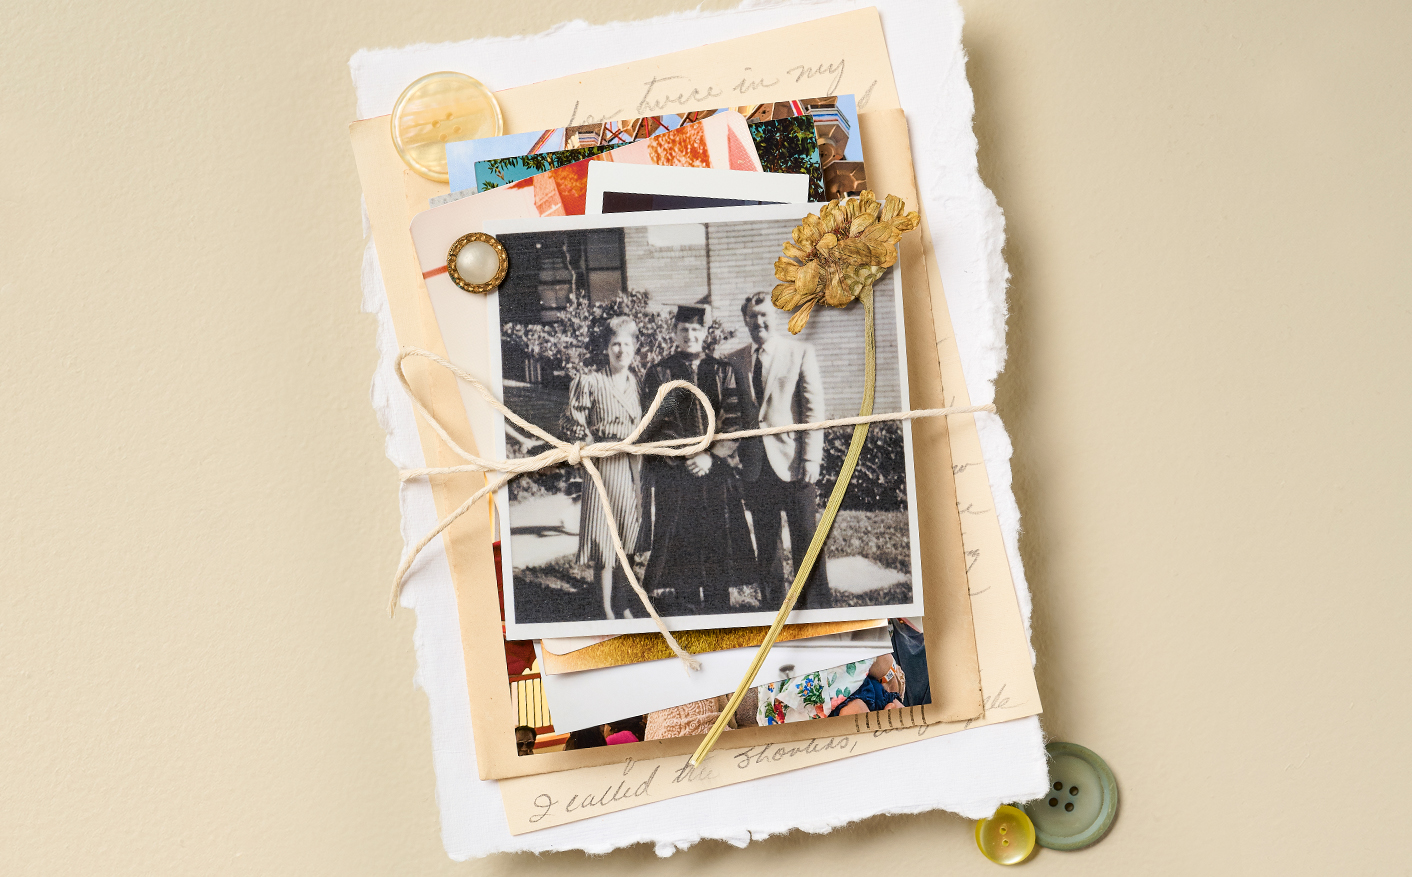 A stack of personal letters and photos is tied with a string.